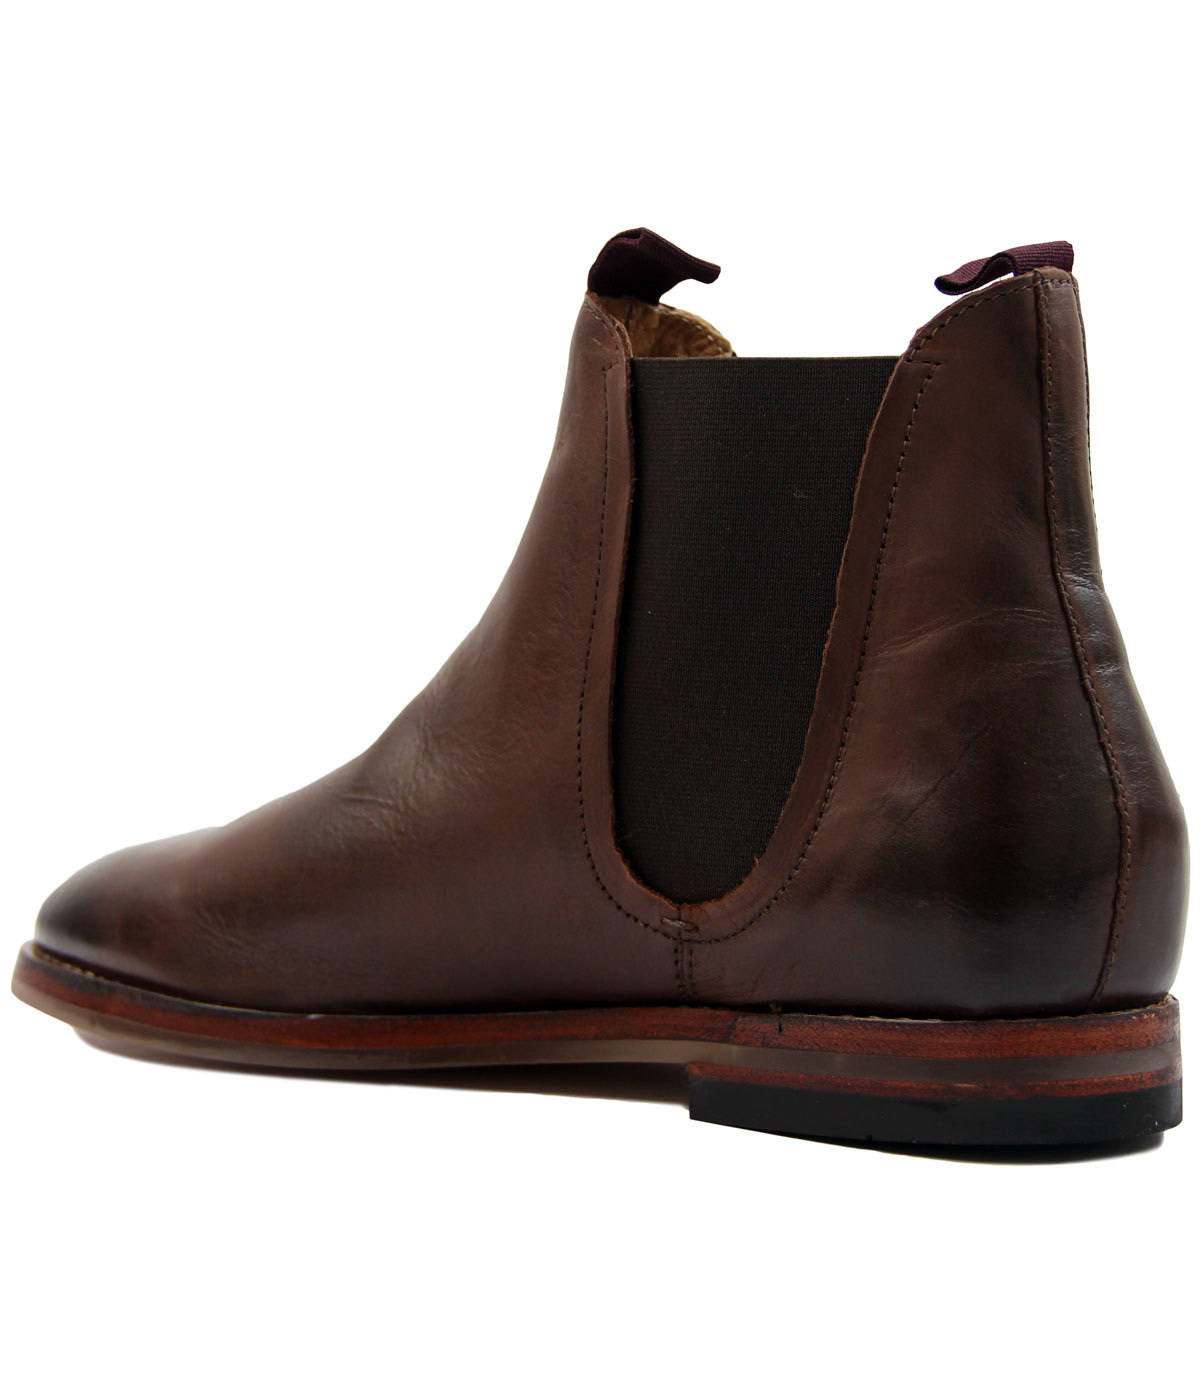 H BY HUDSON Tamper Retro 1960s Mod Leather Chelsea Boots in Brown